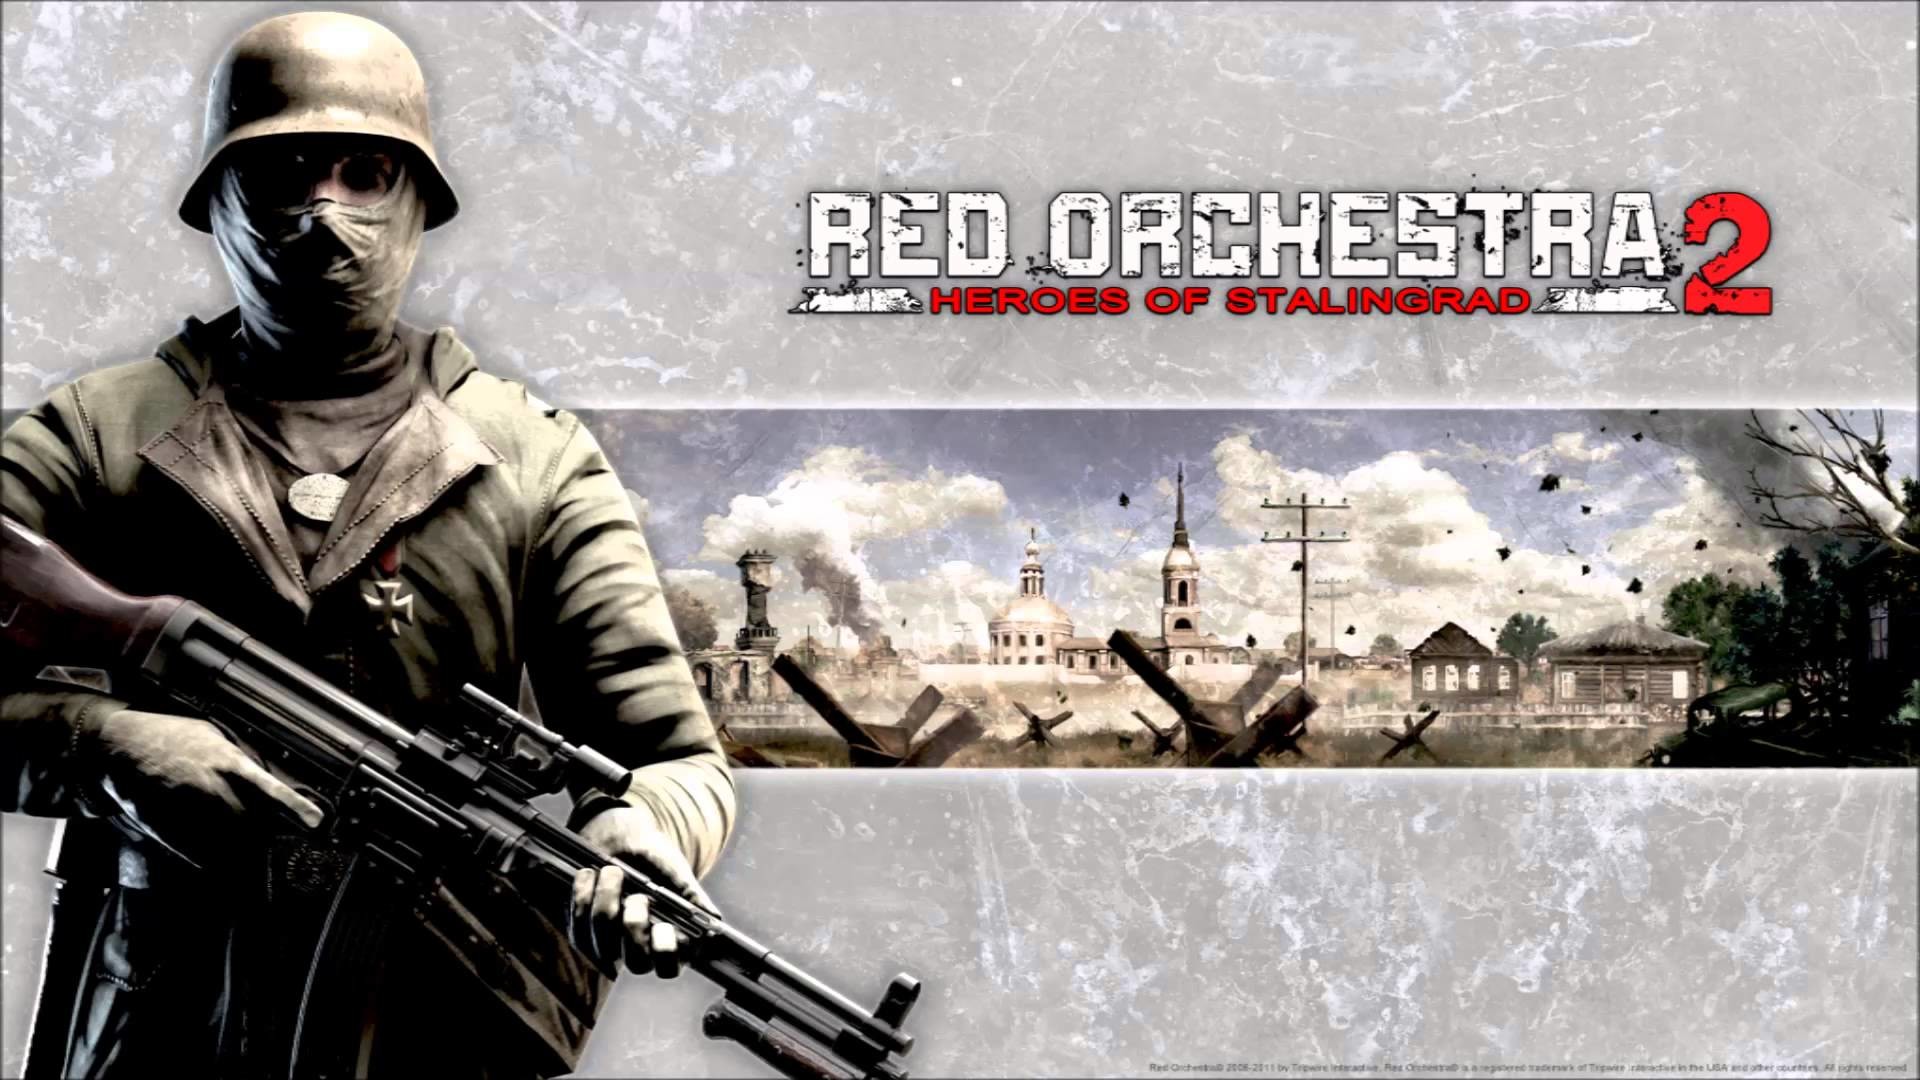 1920x1080 Red Orchestra 2 - Heroes of Stalingrad â» Soundtrack - 02 The Unstoppable  Wehrmacht â» ORIGINAL [HD] - YouTube